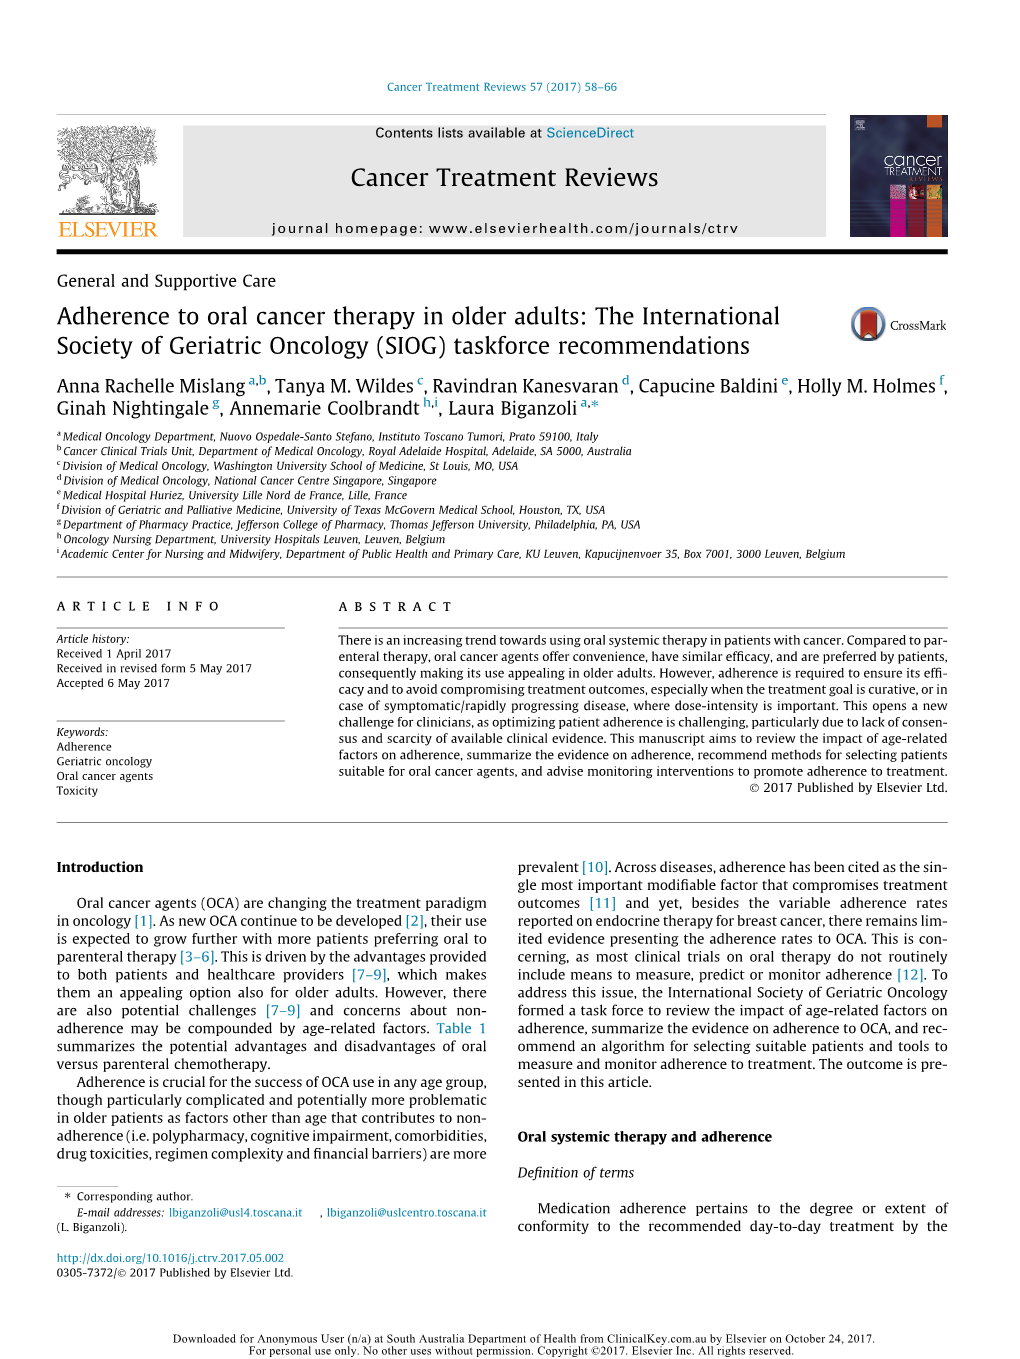 Adherence to Oral Cancer Therapy in Older Adults: the International Society of Geriatric Oncology (SIOG) Taskforce Recommendations